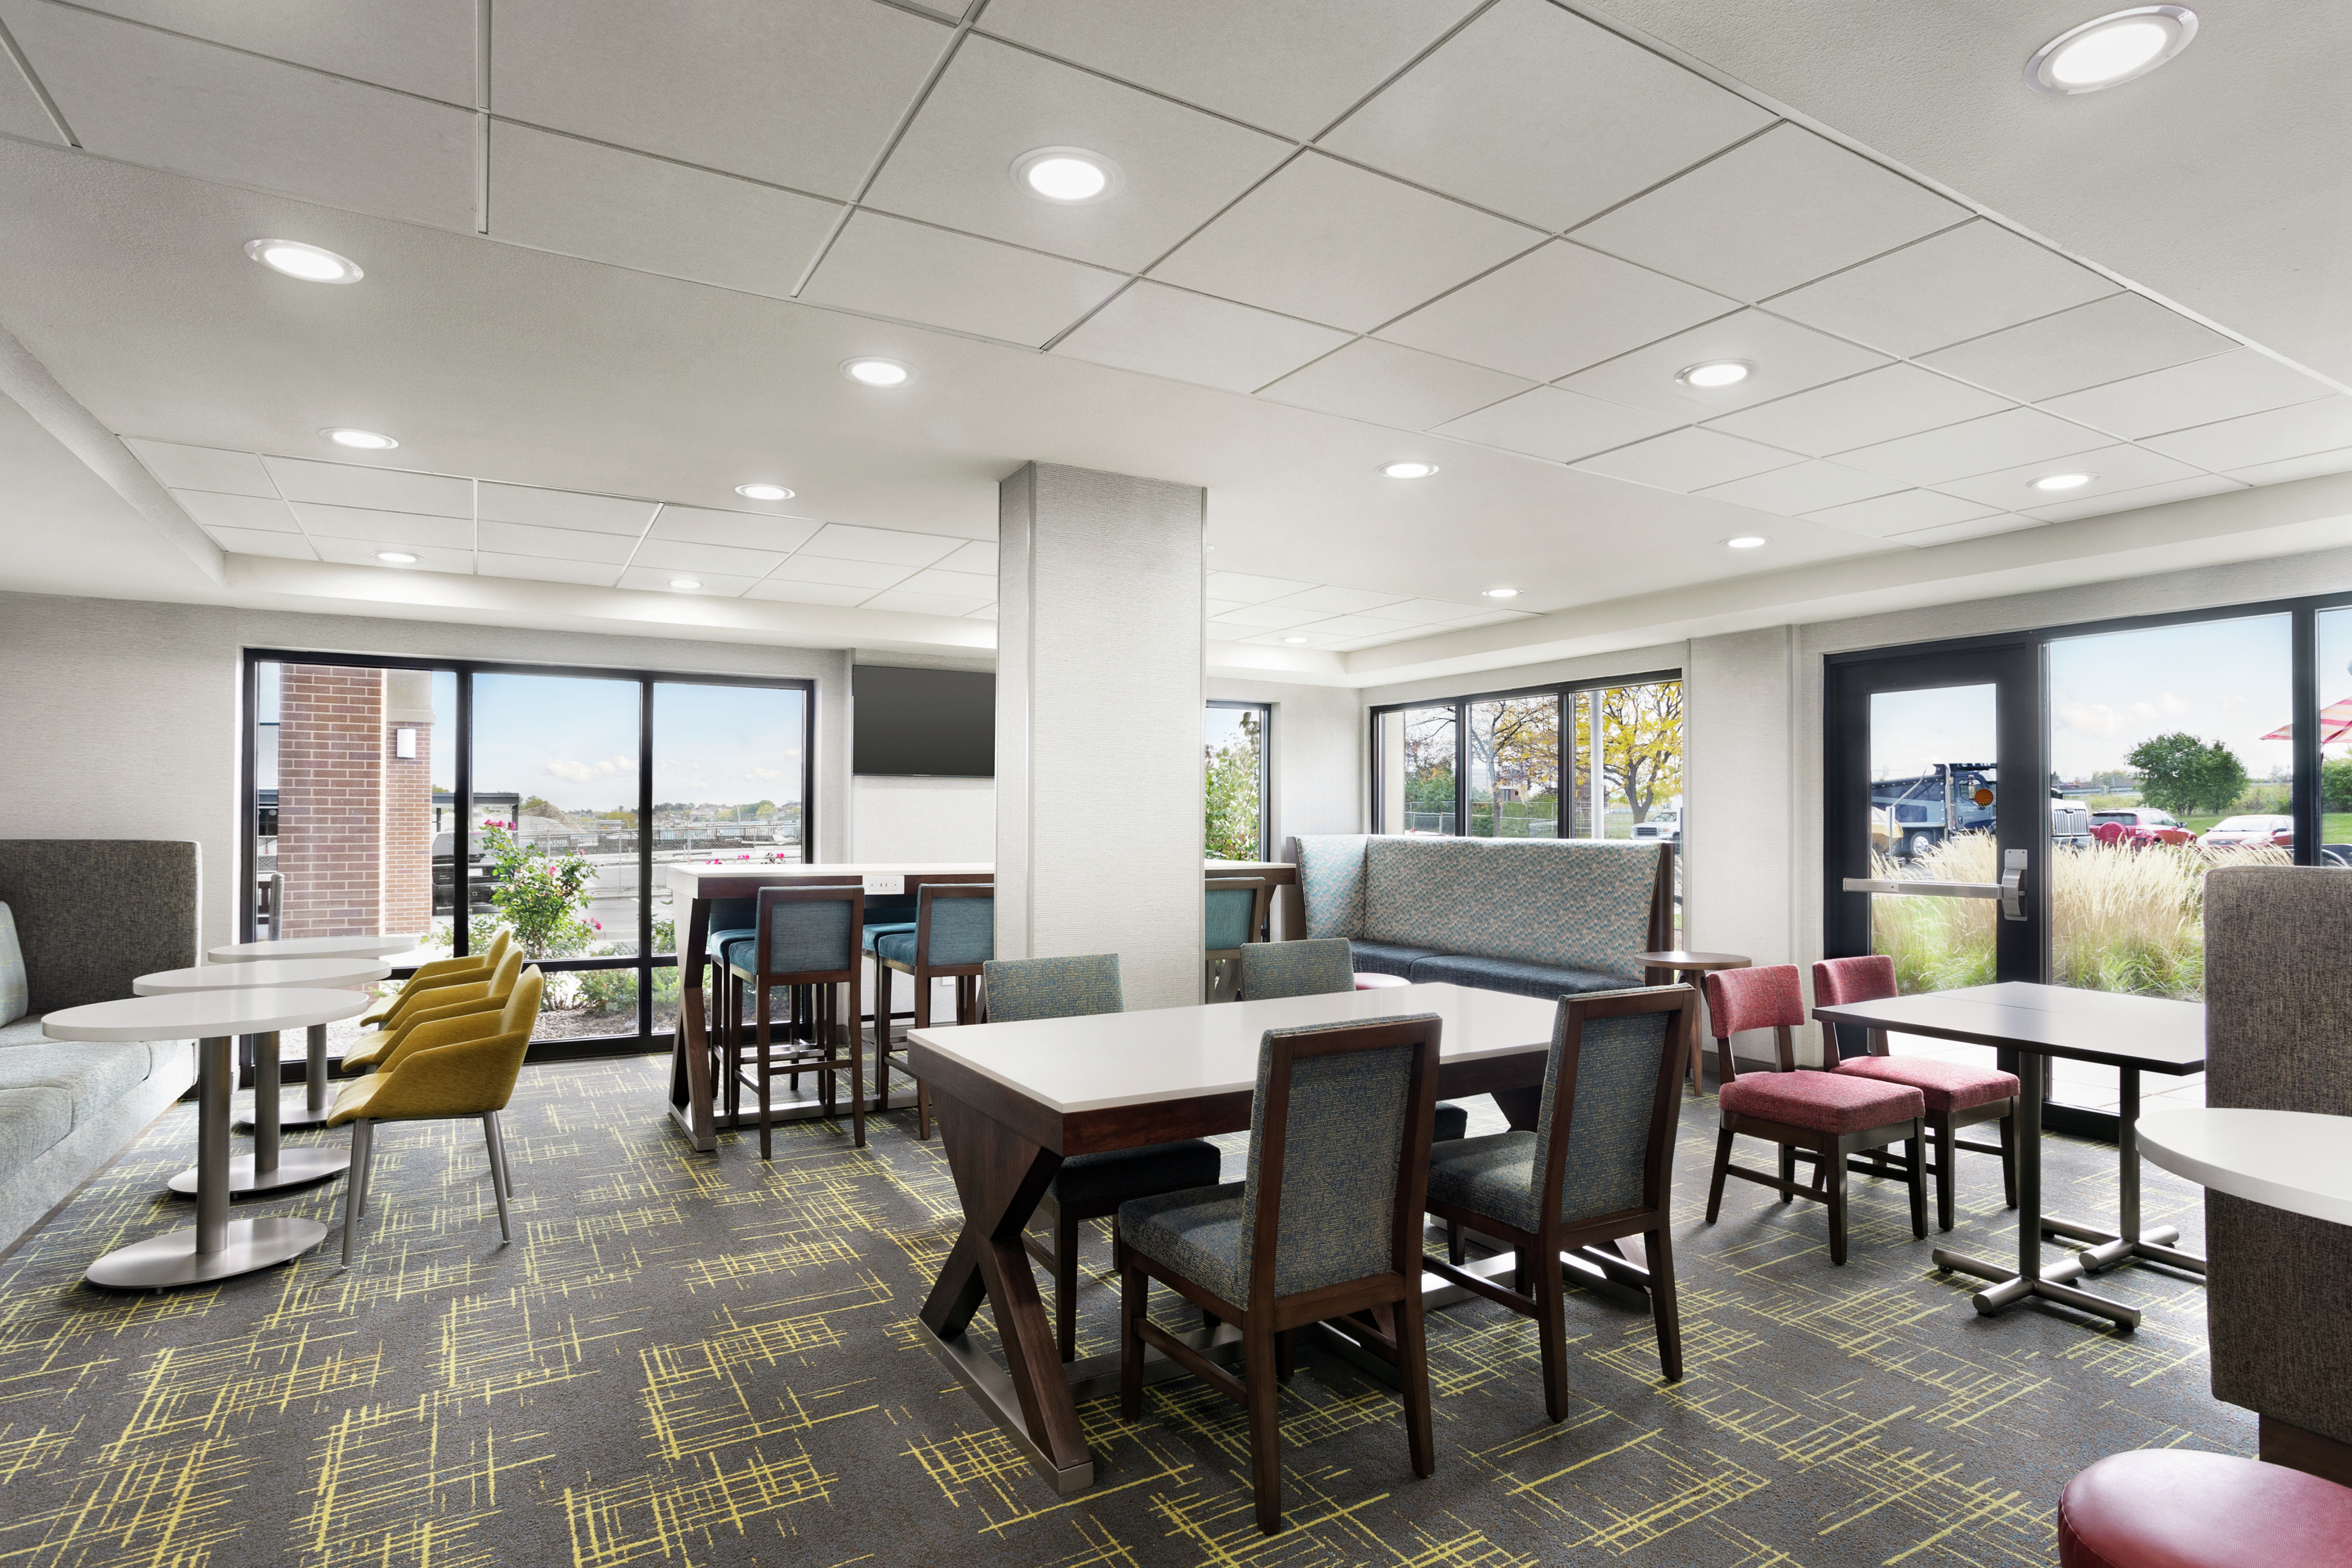 Spacious hotel lobby featuring ample seating and large windows with natural light.